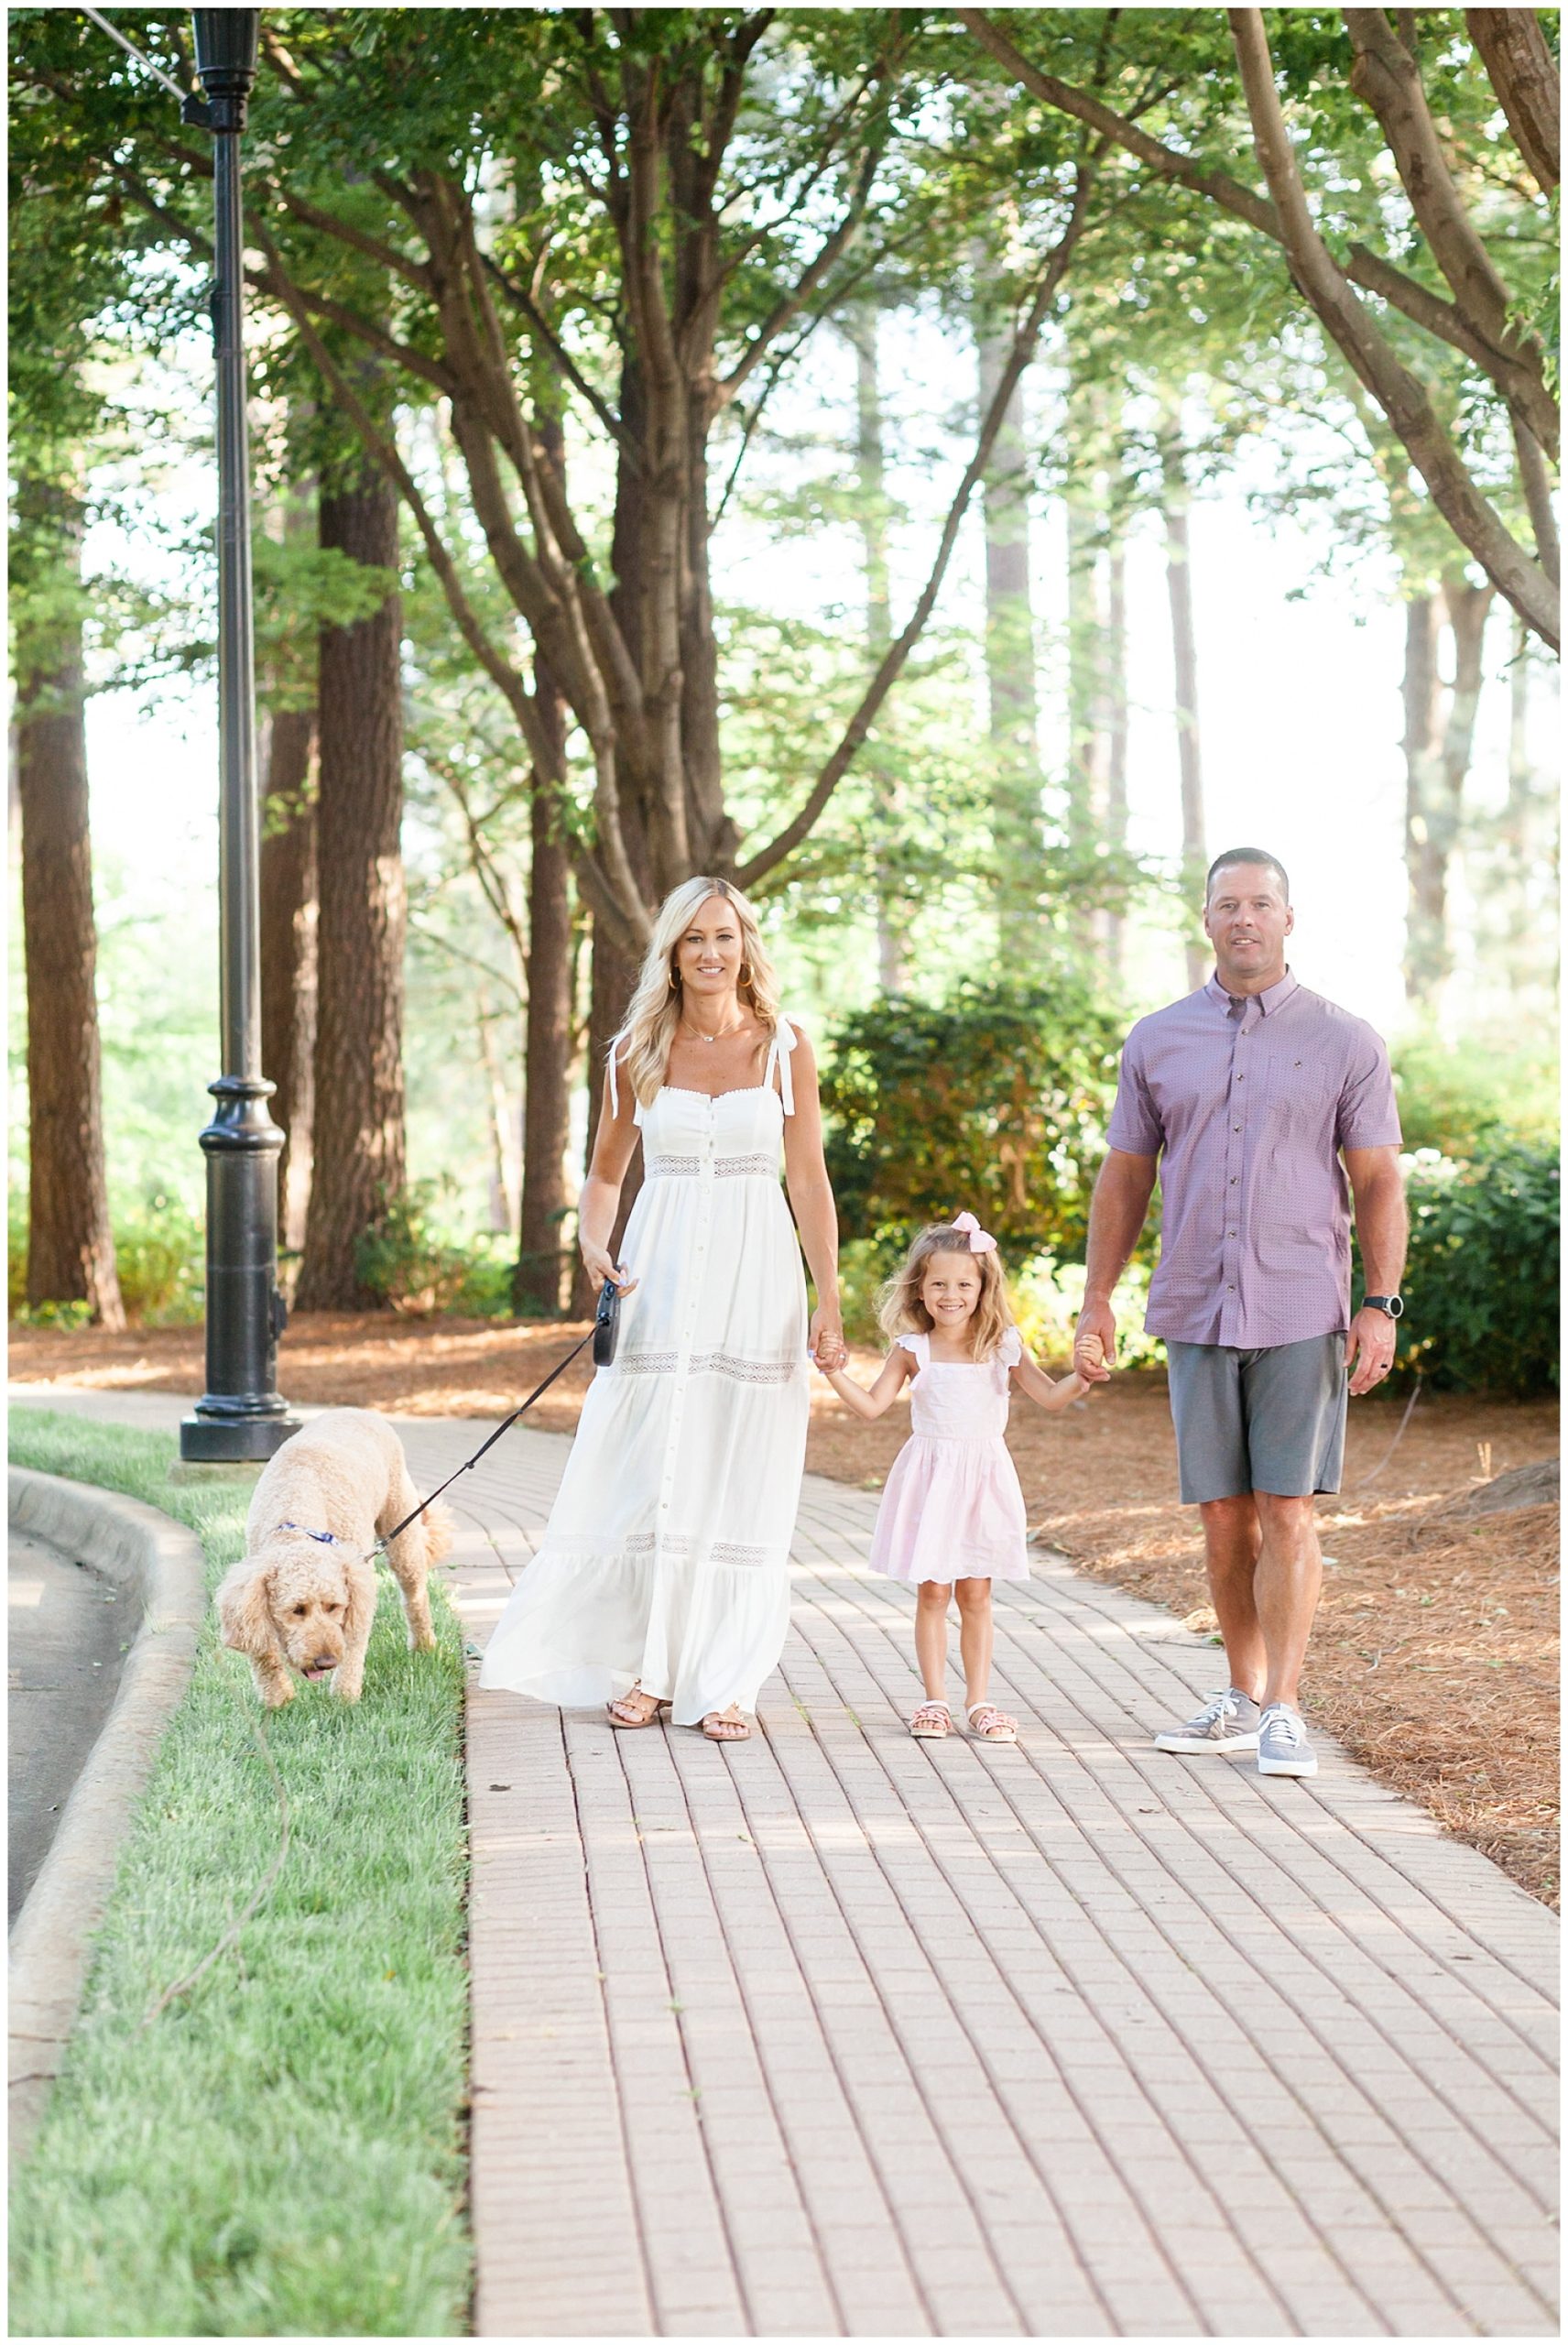 A beautiful family of 3 and their dog are walking down a brick walkway with trees just in the background. Mom is wearing a white ankle-length tiered sleeveless dress that ties at the shoulder. The daughter is wearing a white dress with flutter sleeves and a scalloped hem. Dad is wearing a purple short sleeve button-up shirt with grey shorts.